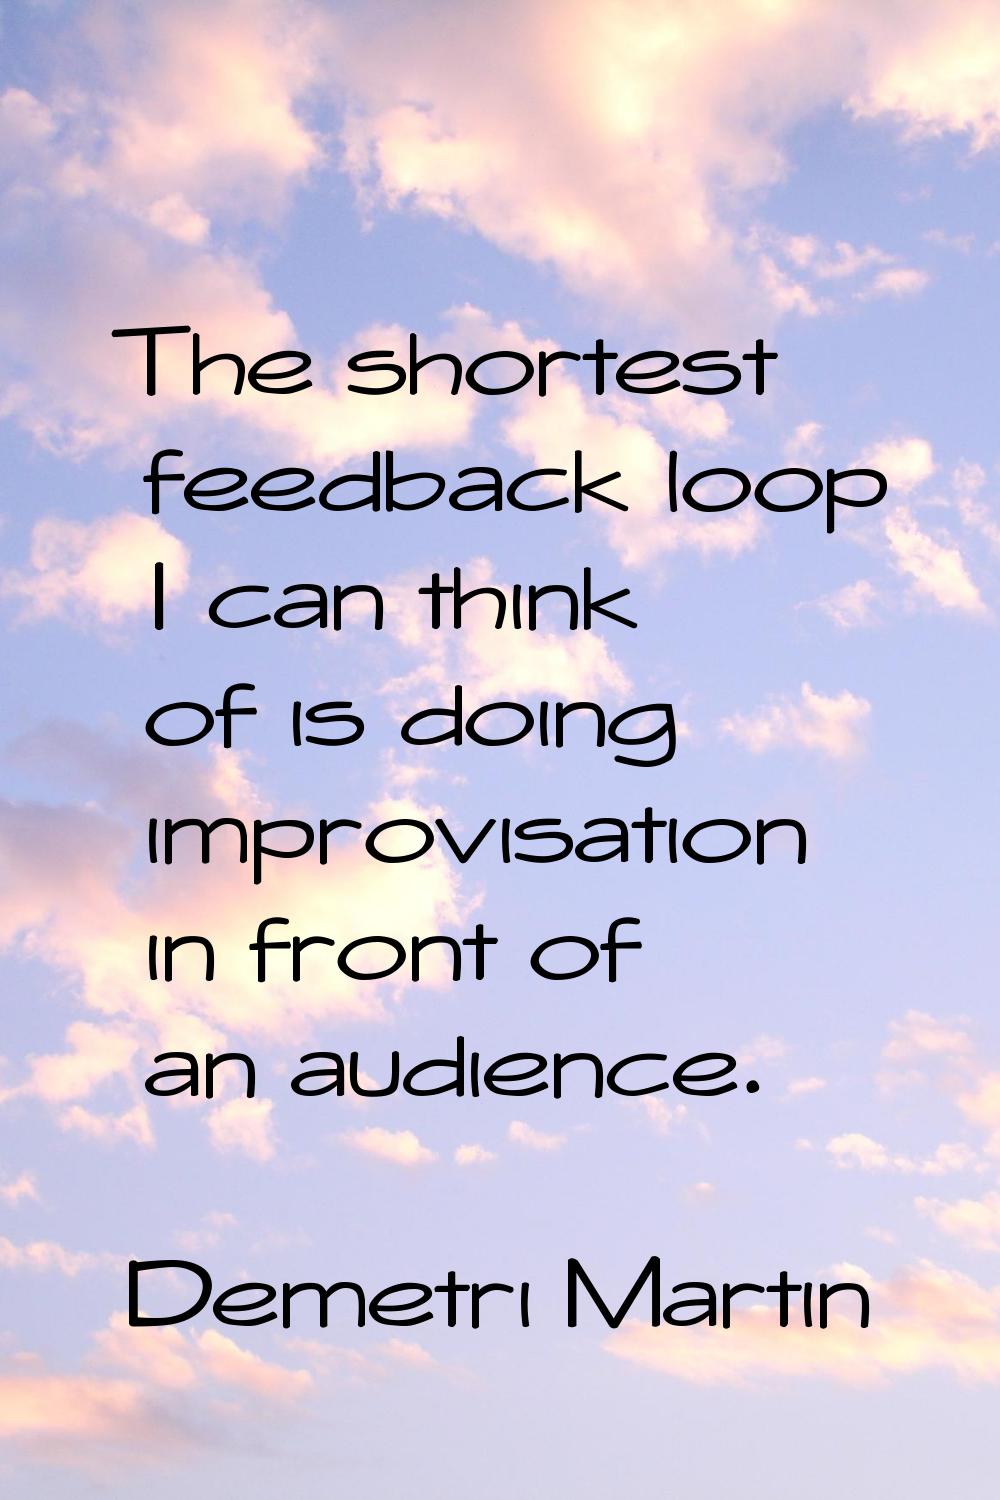 The shortest feedback loop I can think of is doing improvisation in front of an audience.